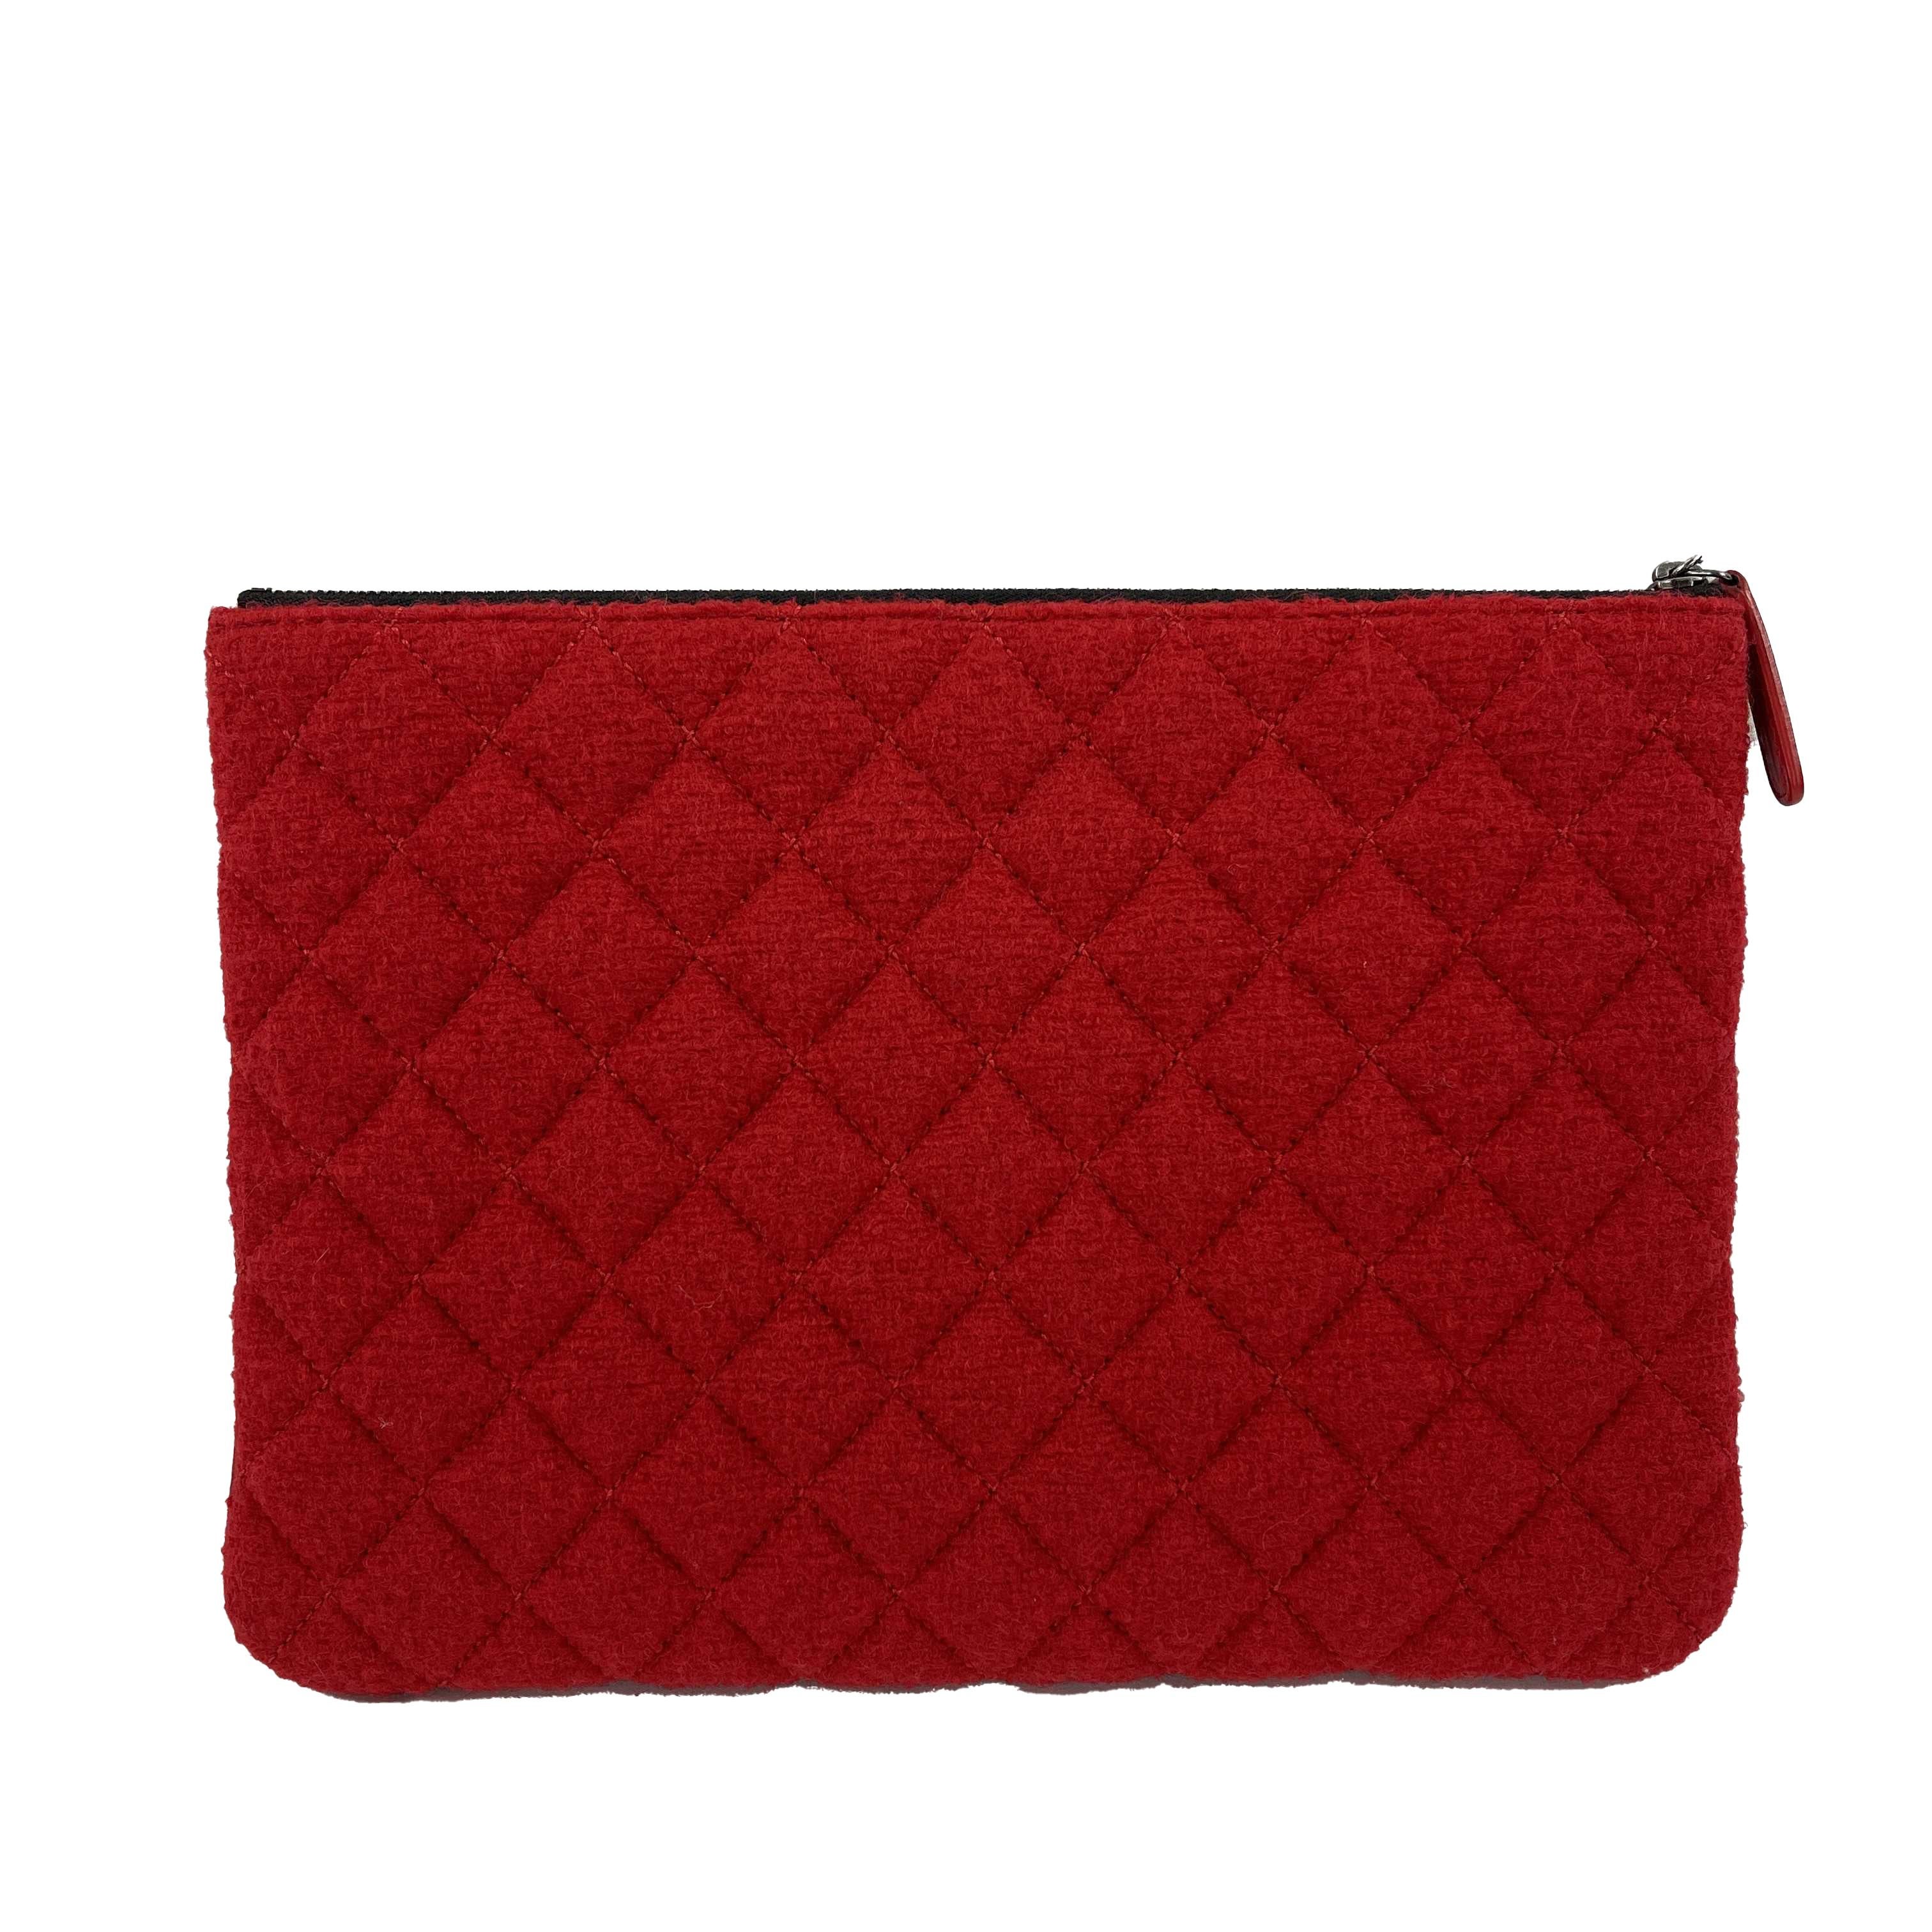 CHANEL - Pristine - Quilted Tweed Wool Clutch/ Pouch/Travel Bag - Beige, Red, Black, Navy, Green, Ruthenium Hardware - Handbag

Description

This Chanel pouch is from the 2015 to 2016 collection.
Its crafted with multicolor quilted tweed wool with a